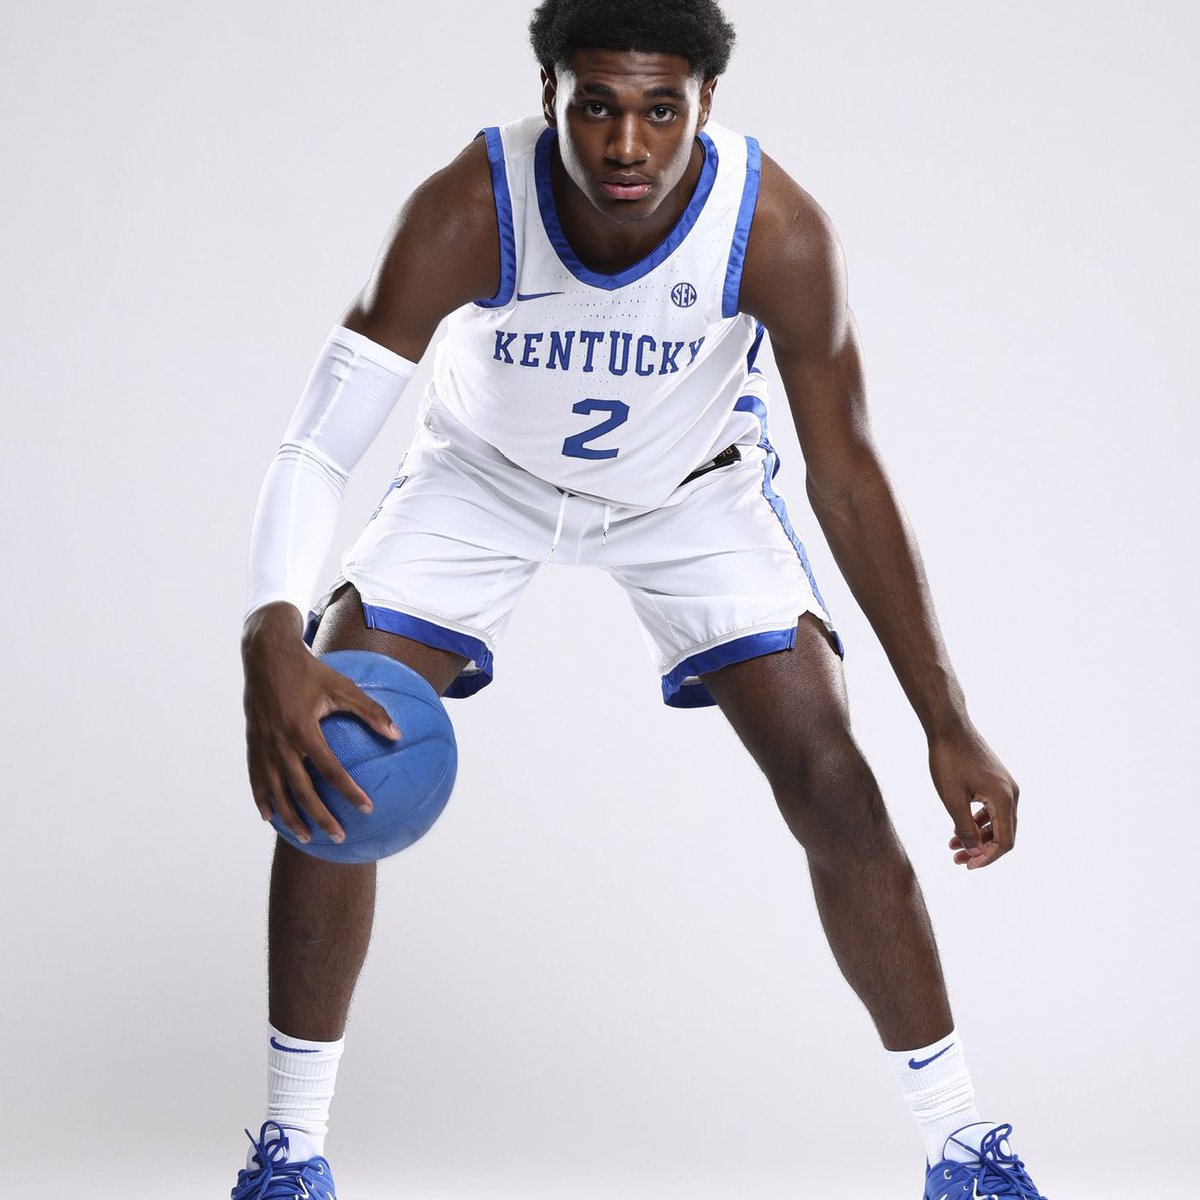 𝙉𝙀𝙒𝙎: Top-25 senior Billy Richmond will decommit from #Kentucky, a source tells @247Sports. Richmond's father played for John Calipari at Memphis. STORY 👉🏾 247sports.com/college/basket…